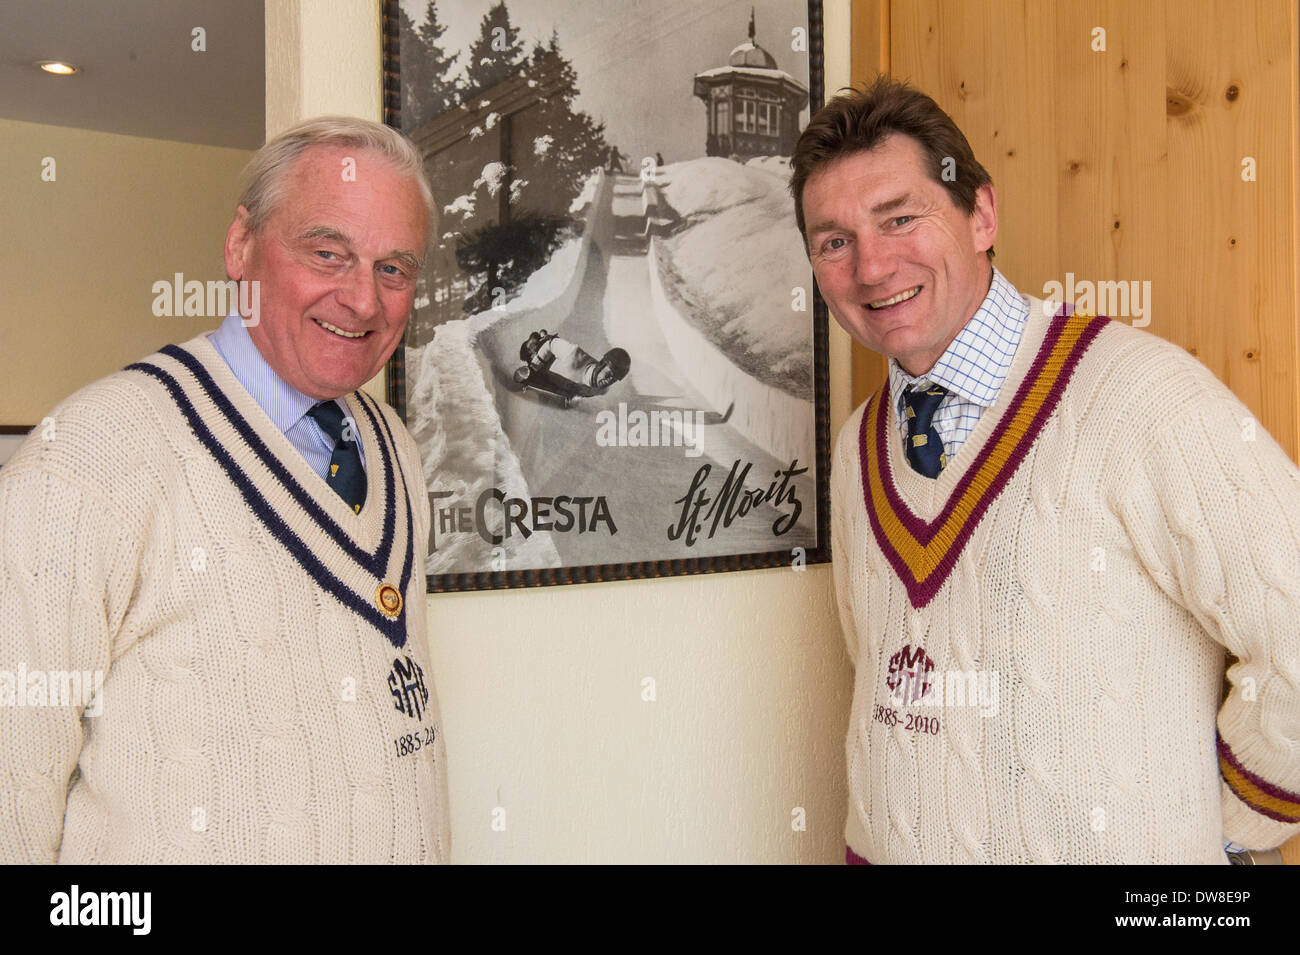 Cresta Club President (2009-2014) Sir Brian Williamson (left) with new elected President James Sunley (from May st 2014) in Sunny Bar Hotel Kulm St.Moritz on Sunday March 2, 2014 PhotoCredit: fotoSwiss.com/cattaneo/picture alliance Stock Photo